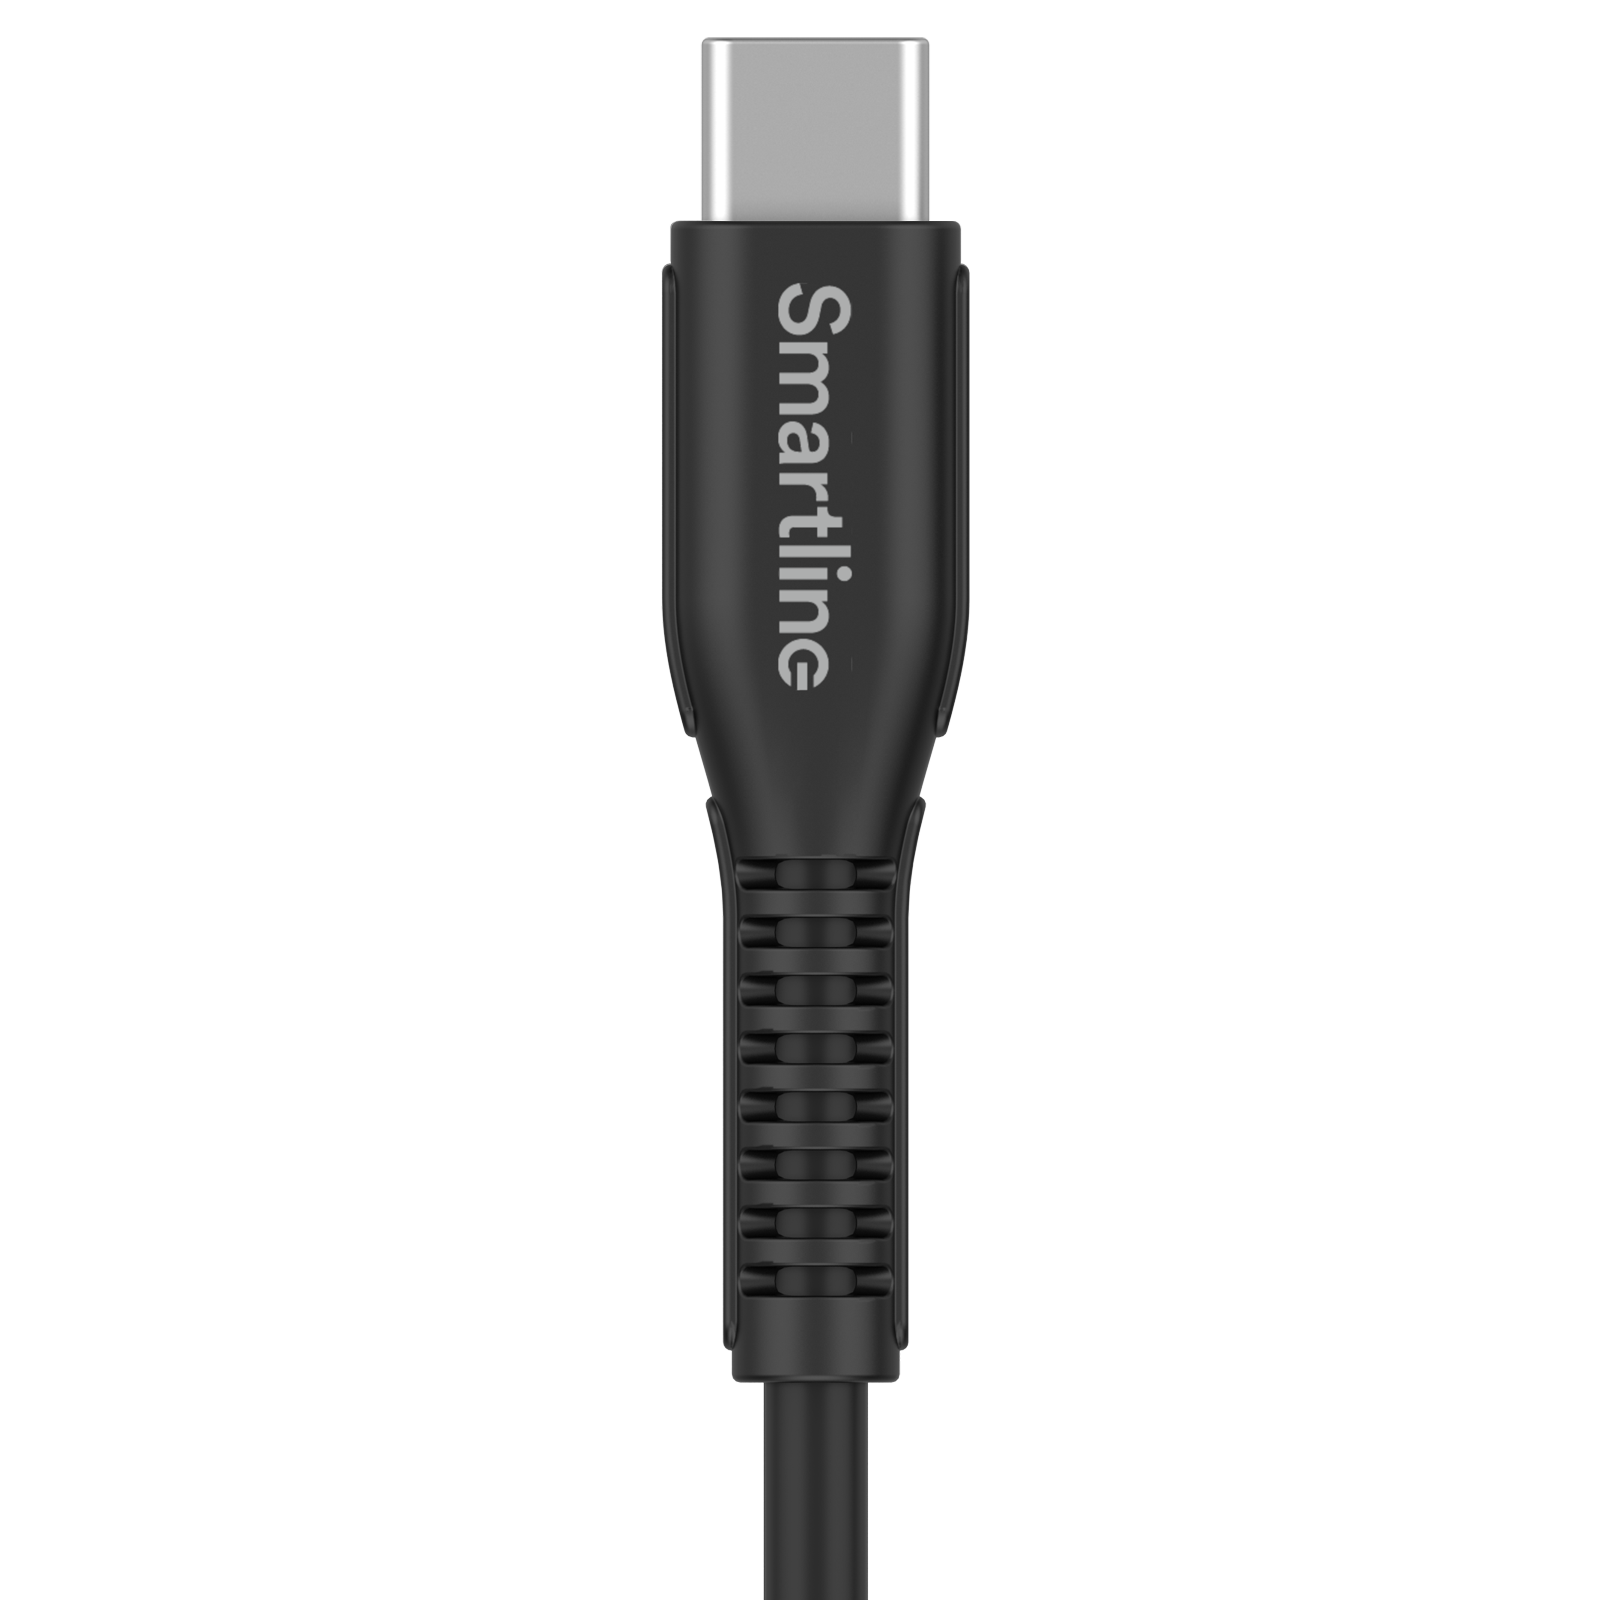 Strong USB-A to USB-C Cable 2 meters Black